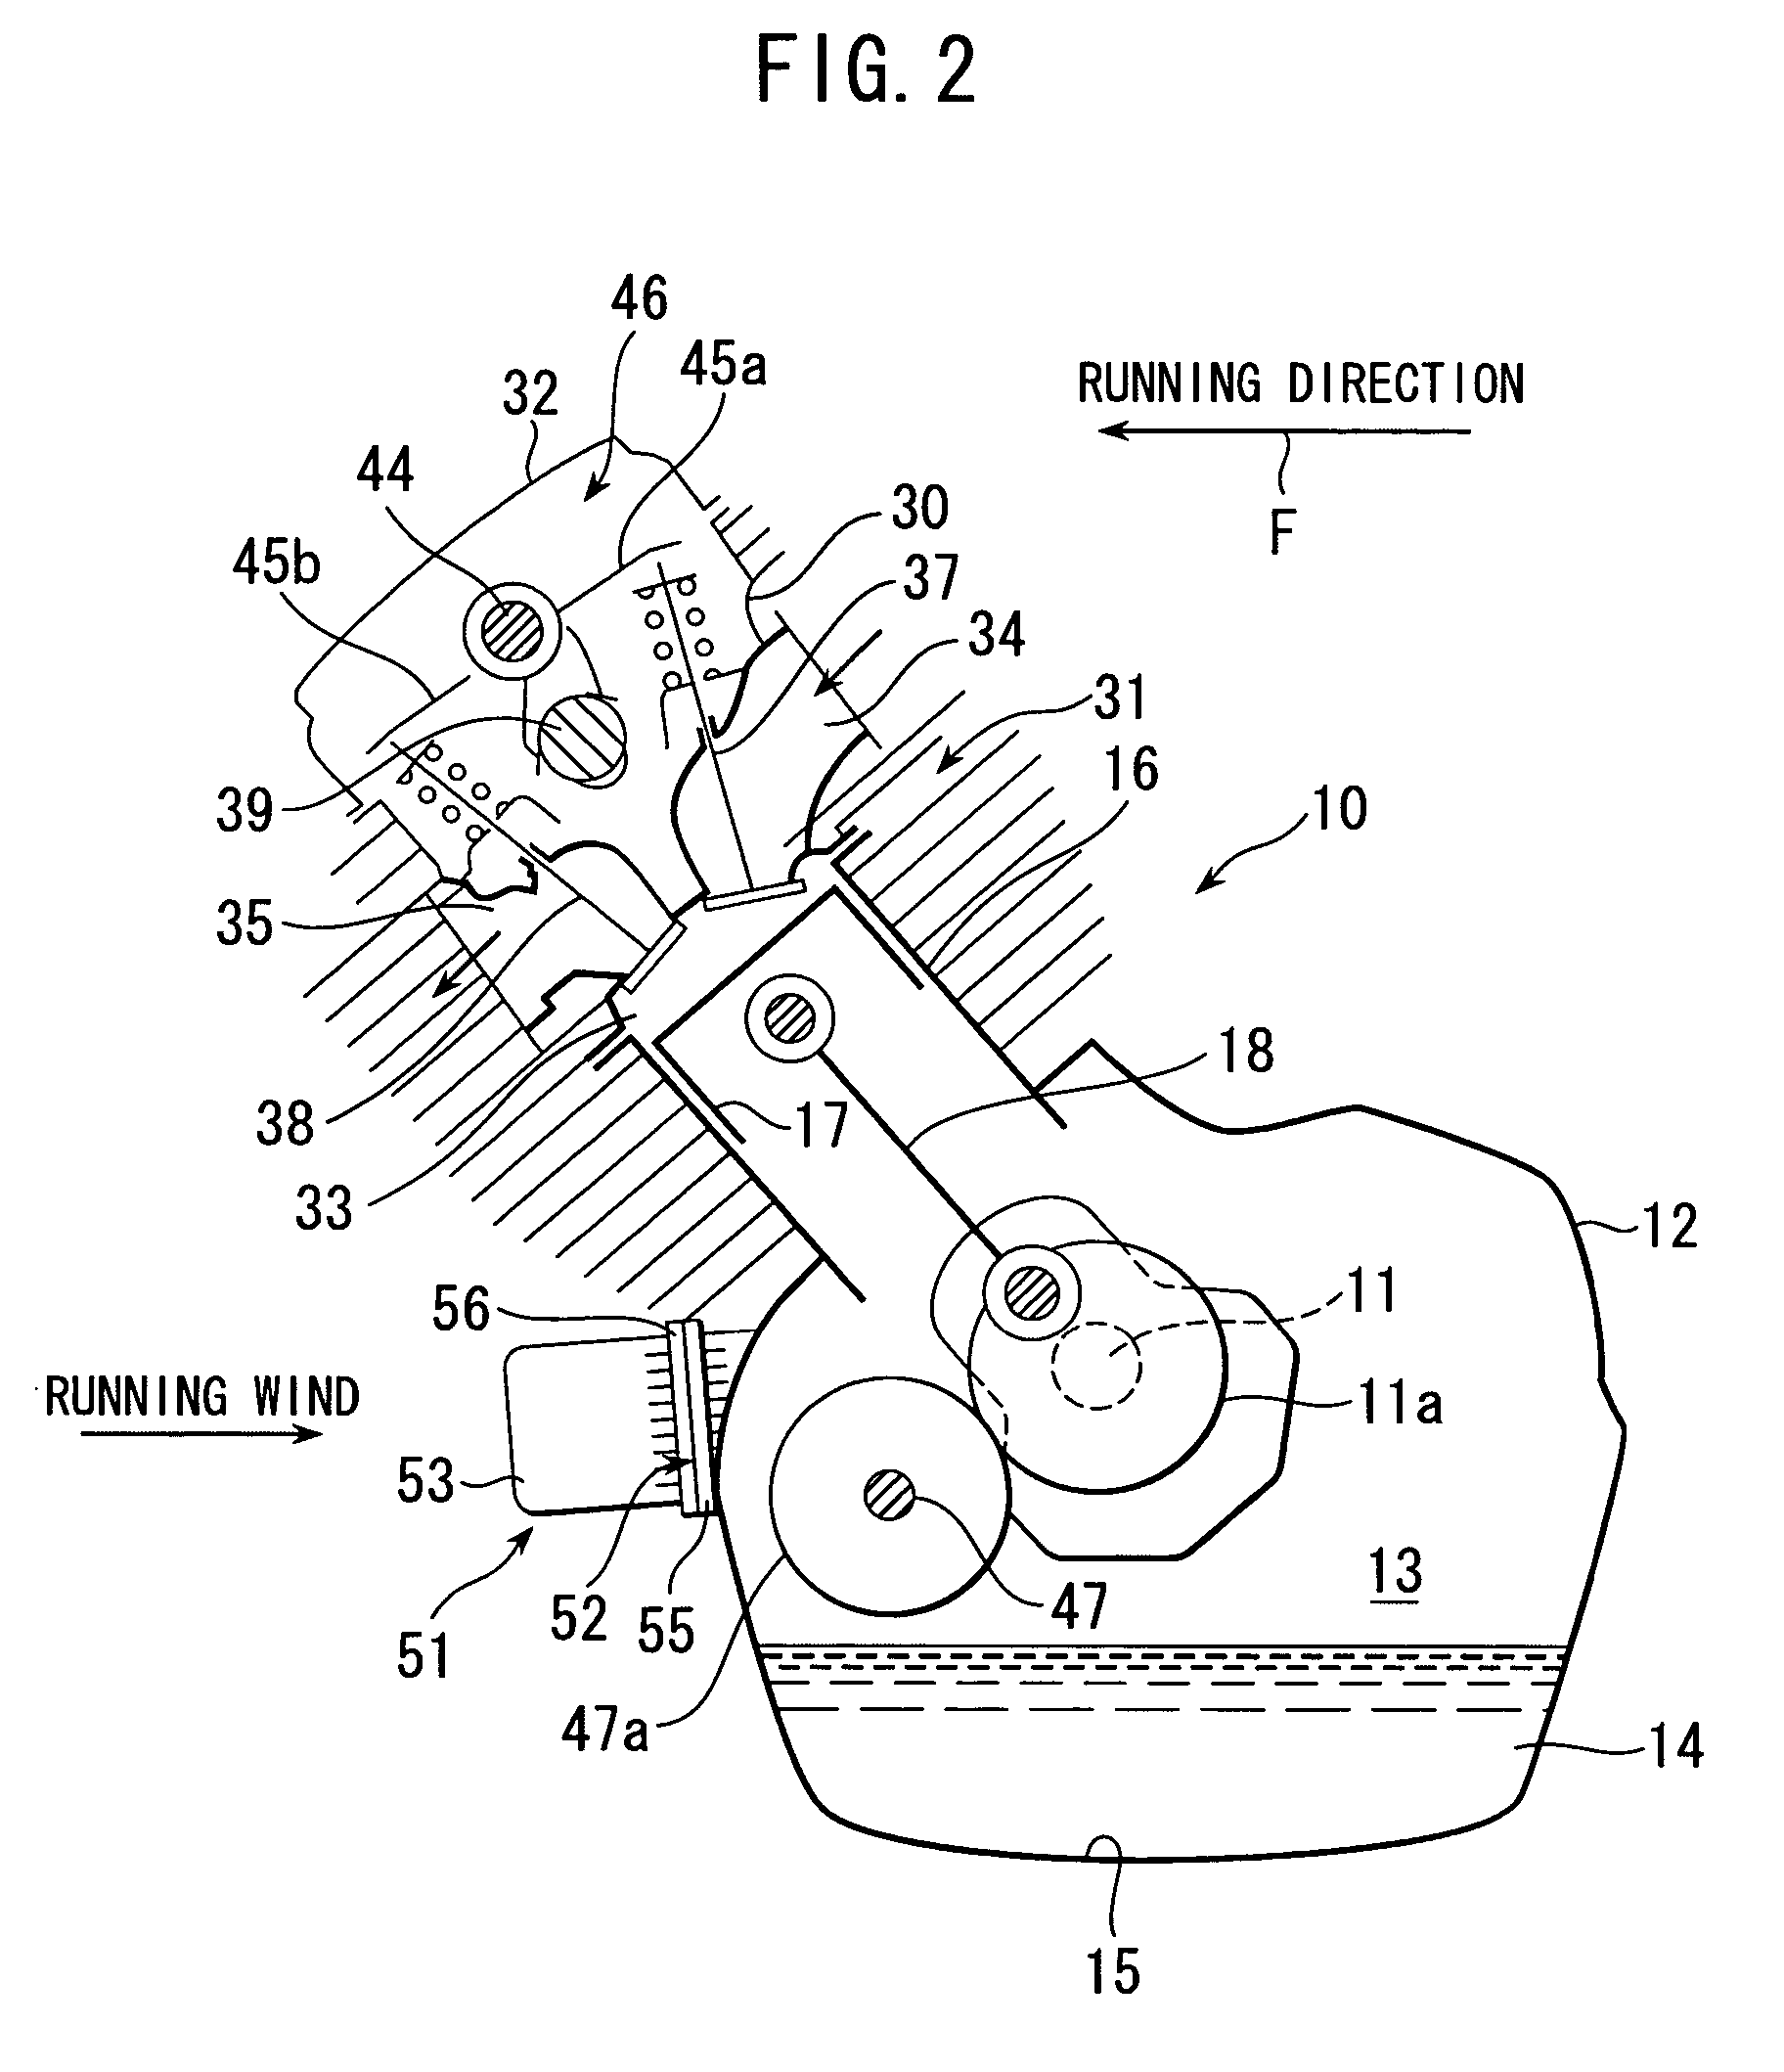 Oil cooling system of an air-cooled engine